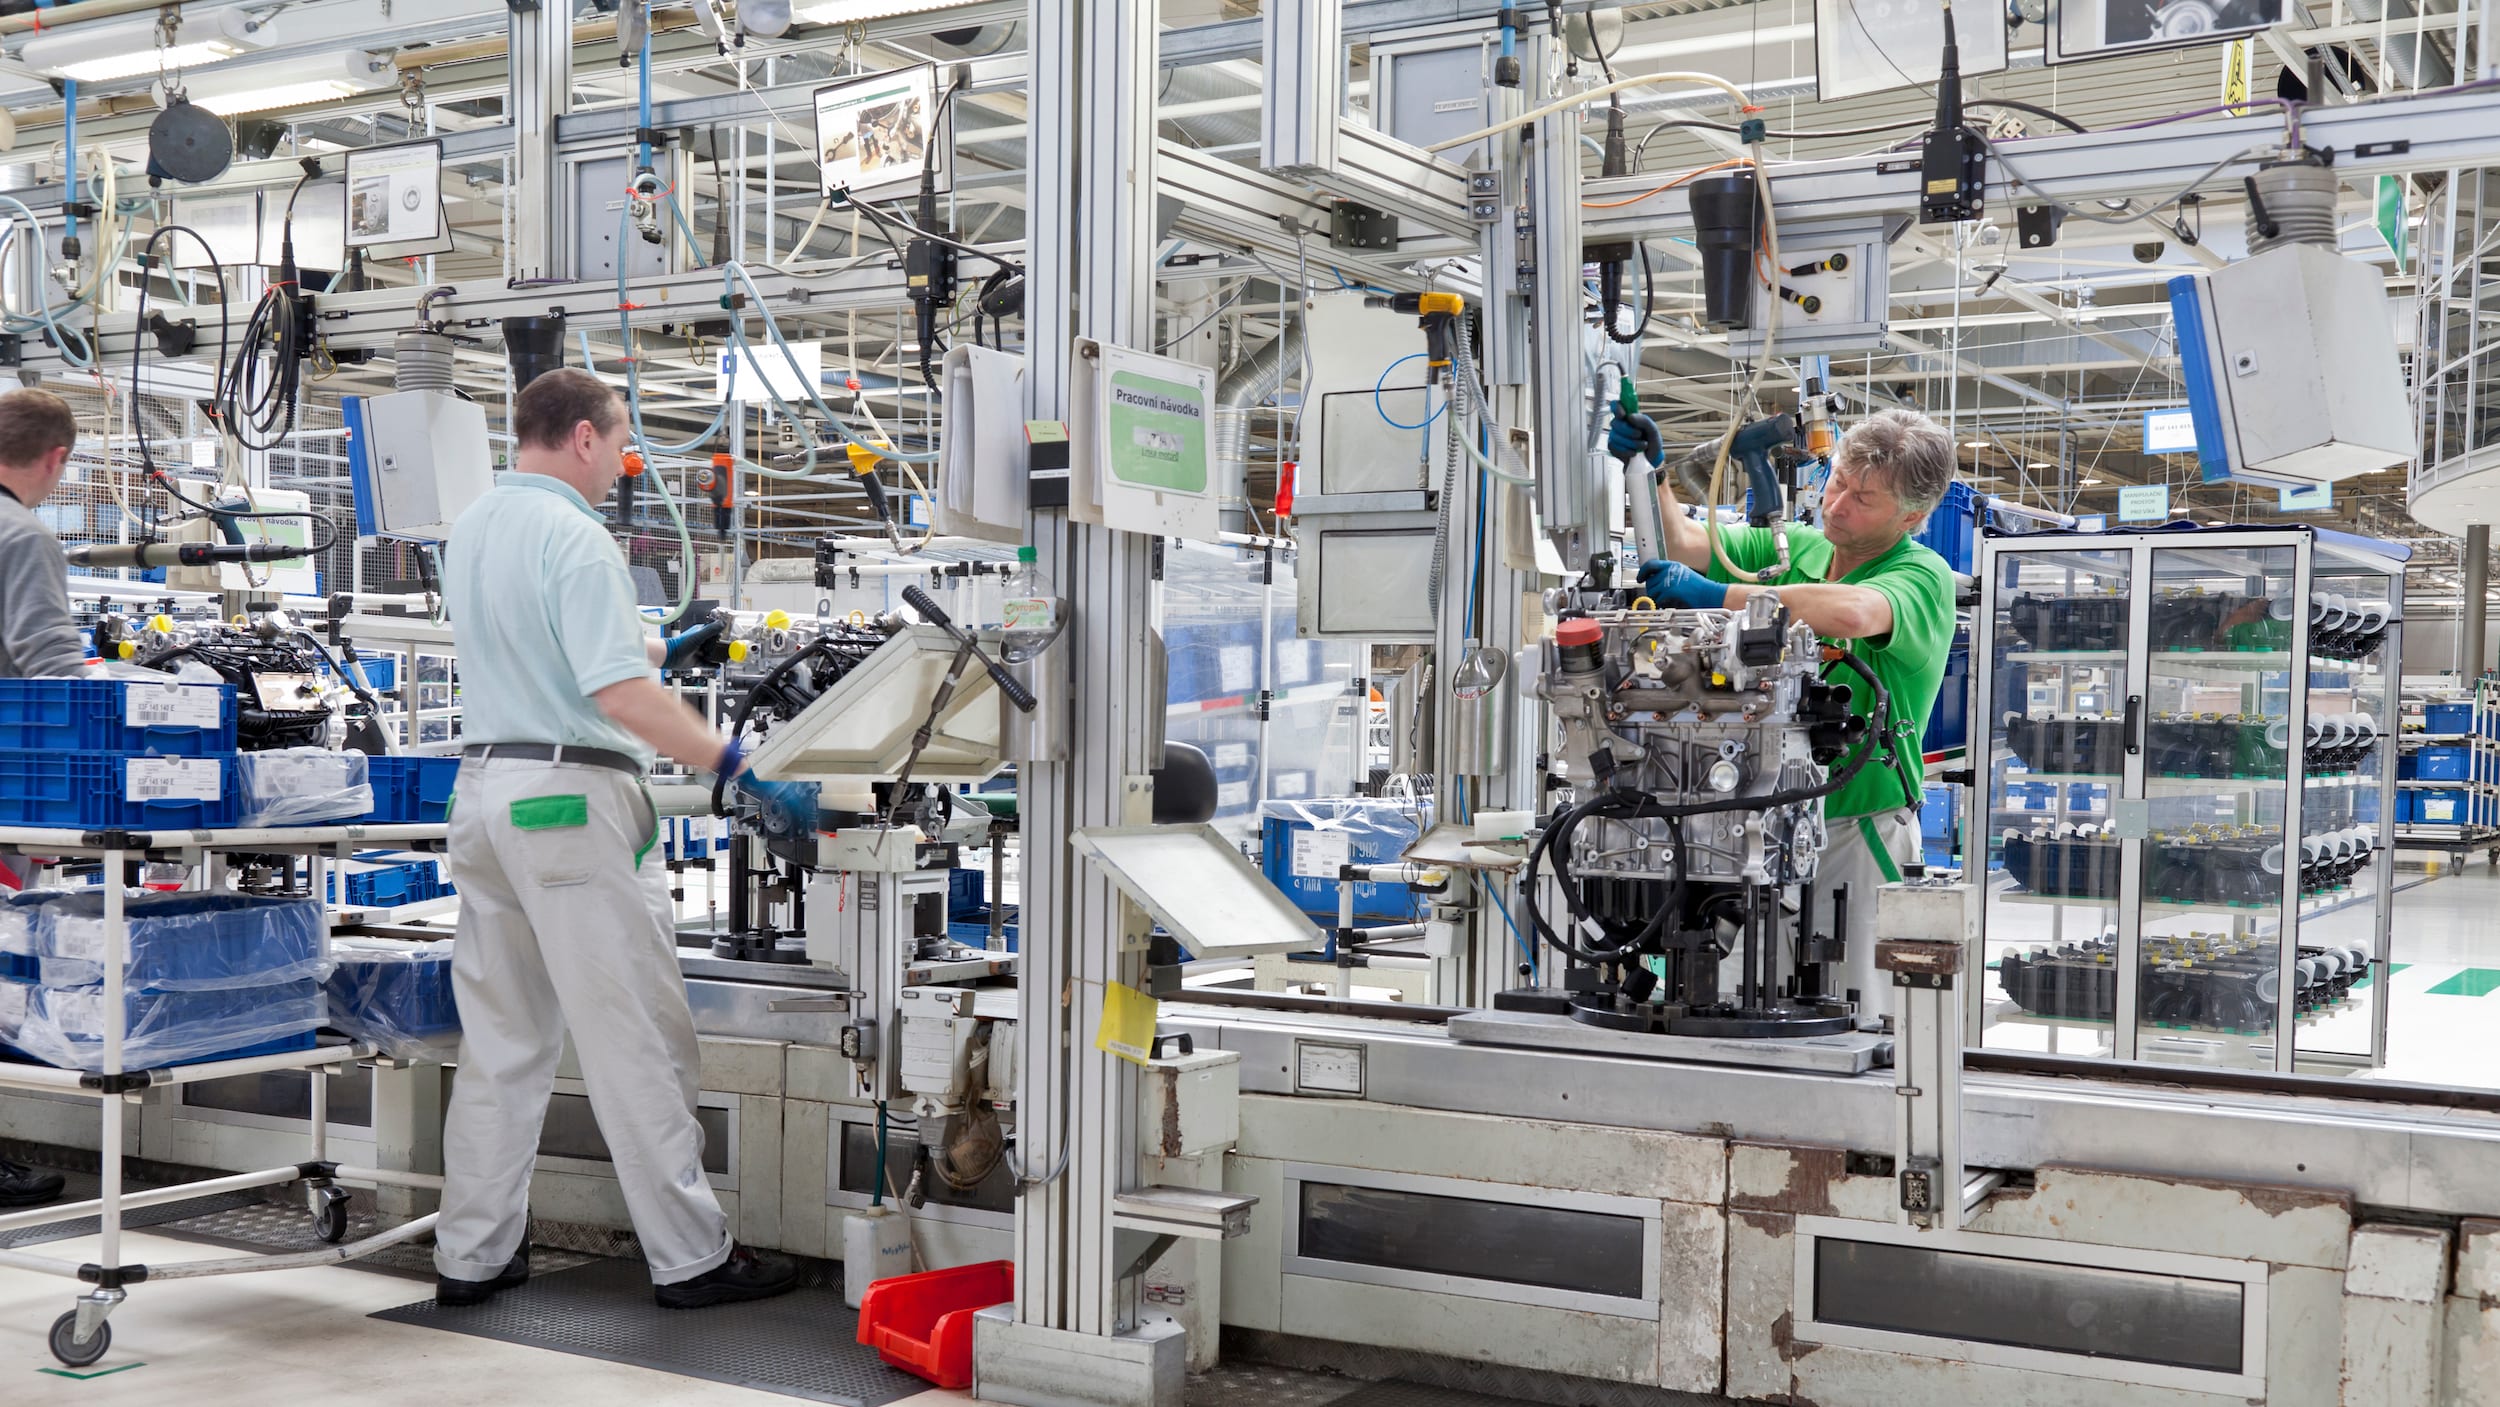 Digitally Enabled Services and the Future of Manufacturing